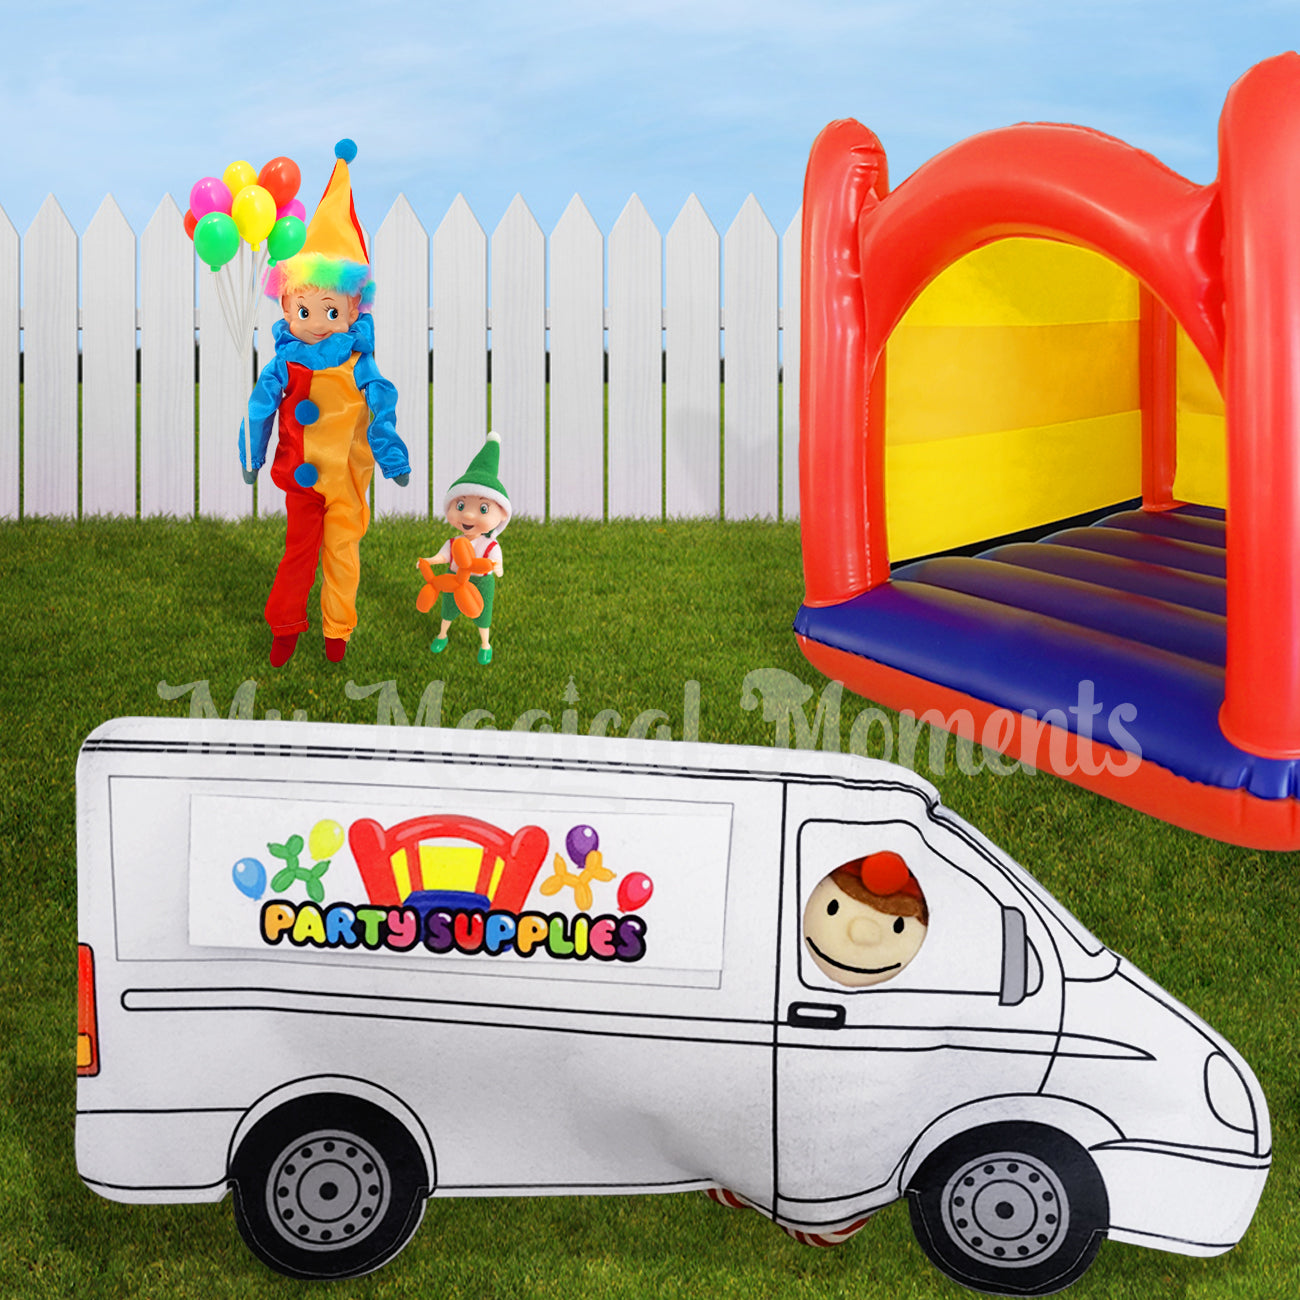 Party scene including a jumping castle elf prop, a elf dressed as a clown holding balloons and toddler elf. There is an elf for christmas dressed as a party supply van